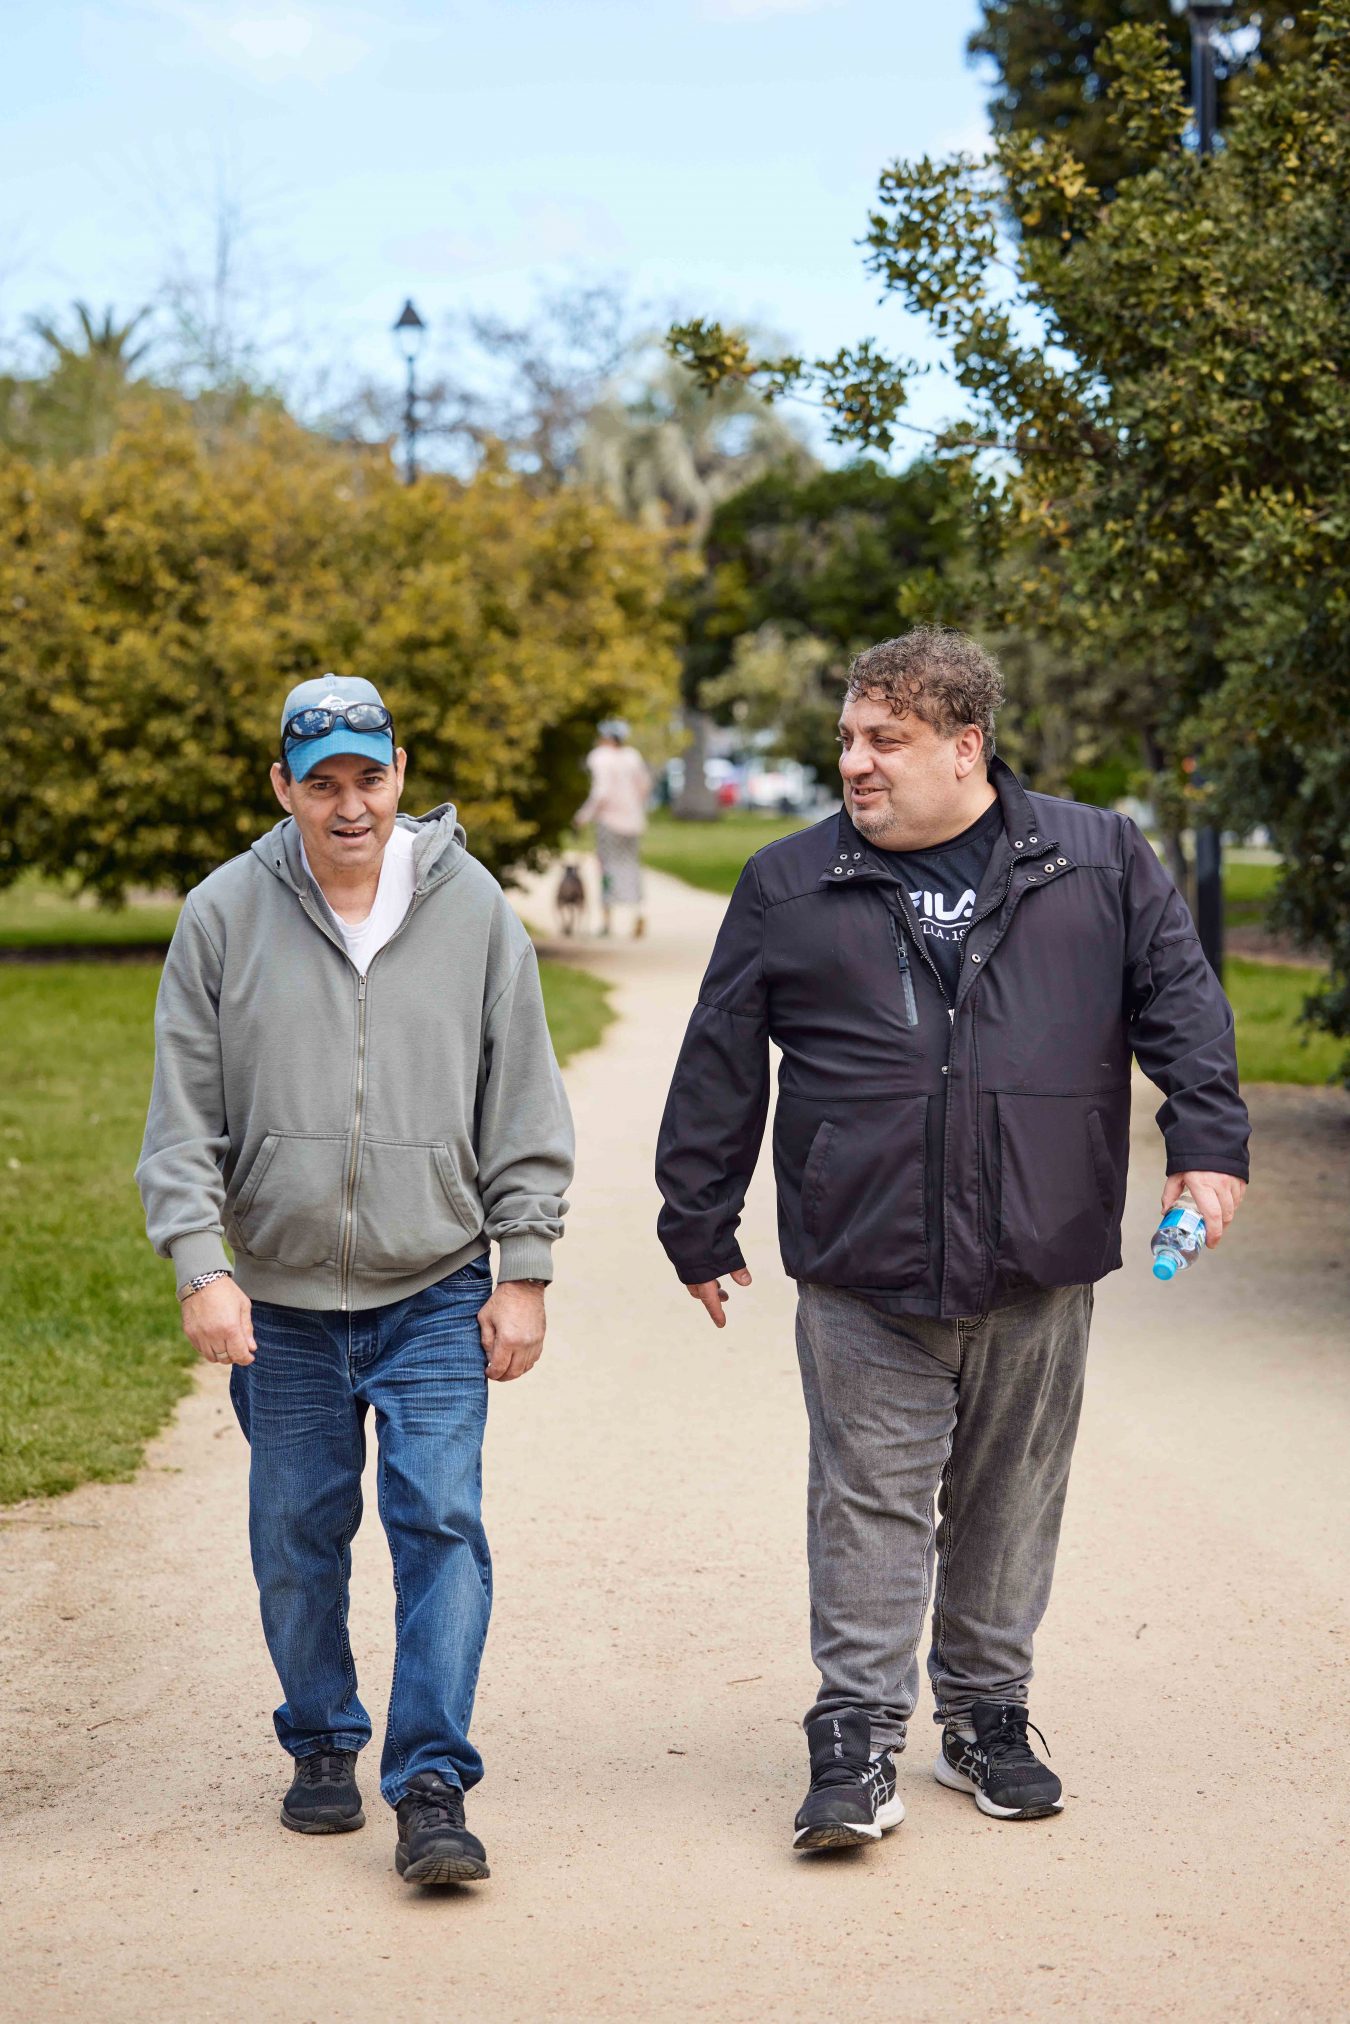 Support Worker and Client walking on foot path in park. Support Worker is smiling at client.